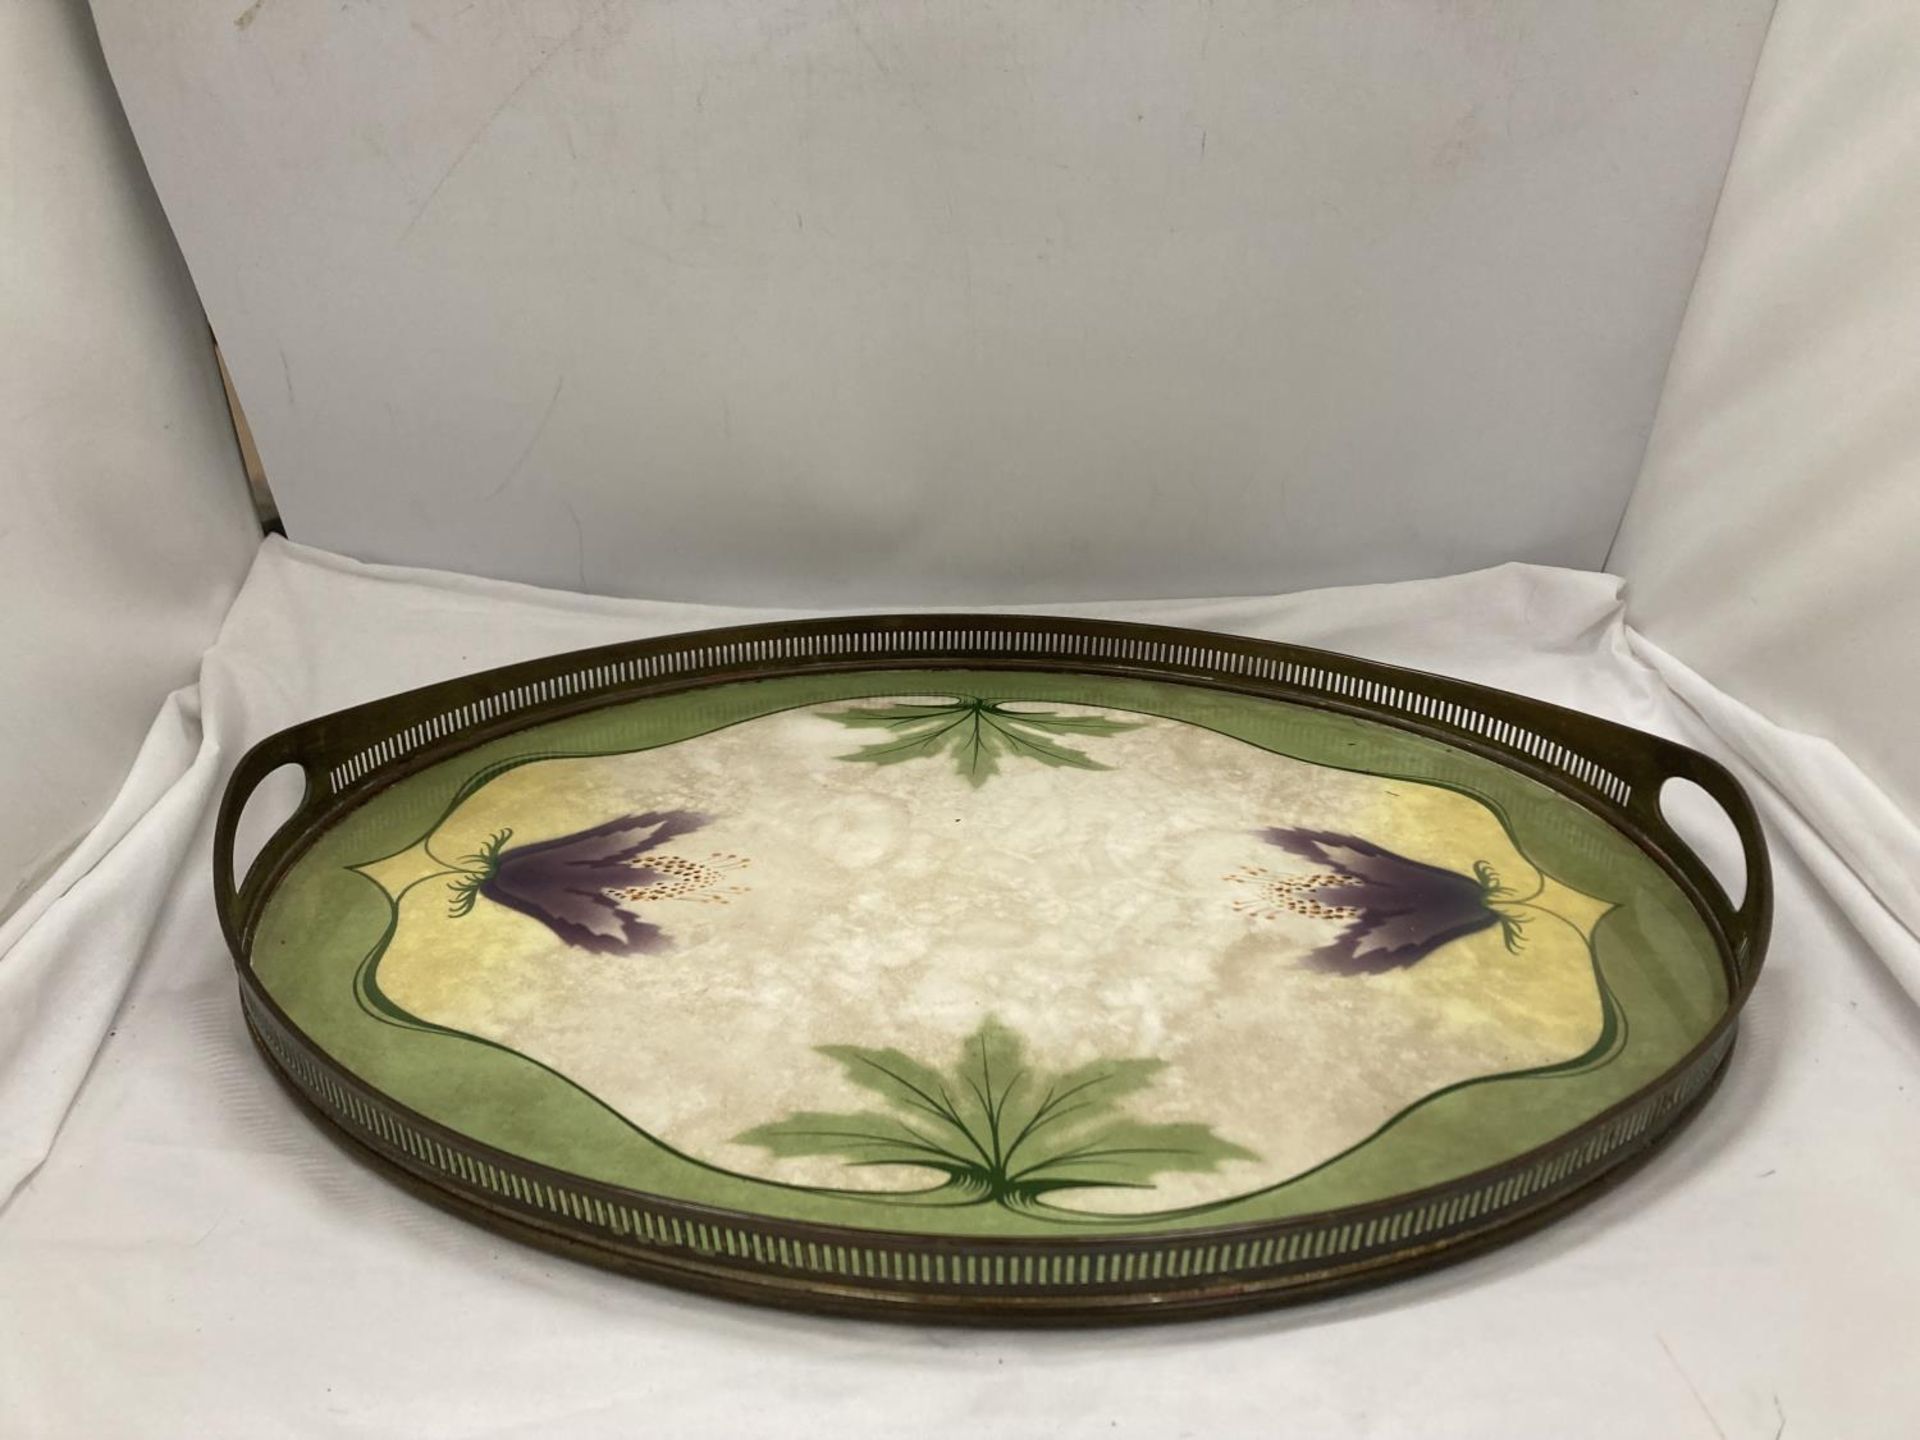 AN ART NOUVEAU STYLE BRASS AND CERAMIC TRAY WITH GALLERIED SIDES ADORNED WITH FLOWERS AND LEAVES